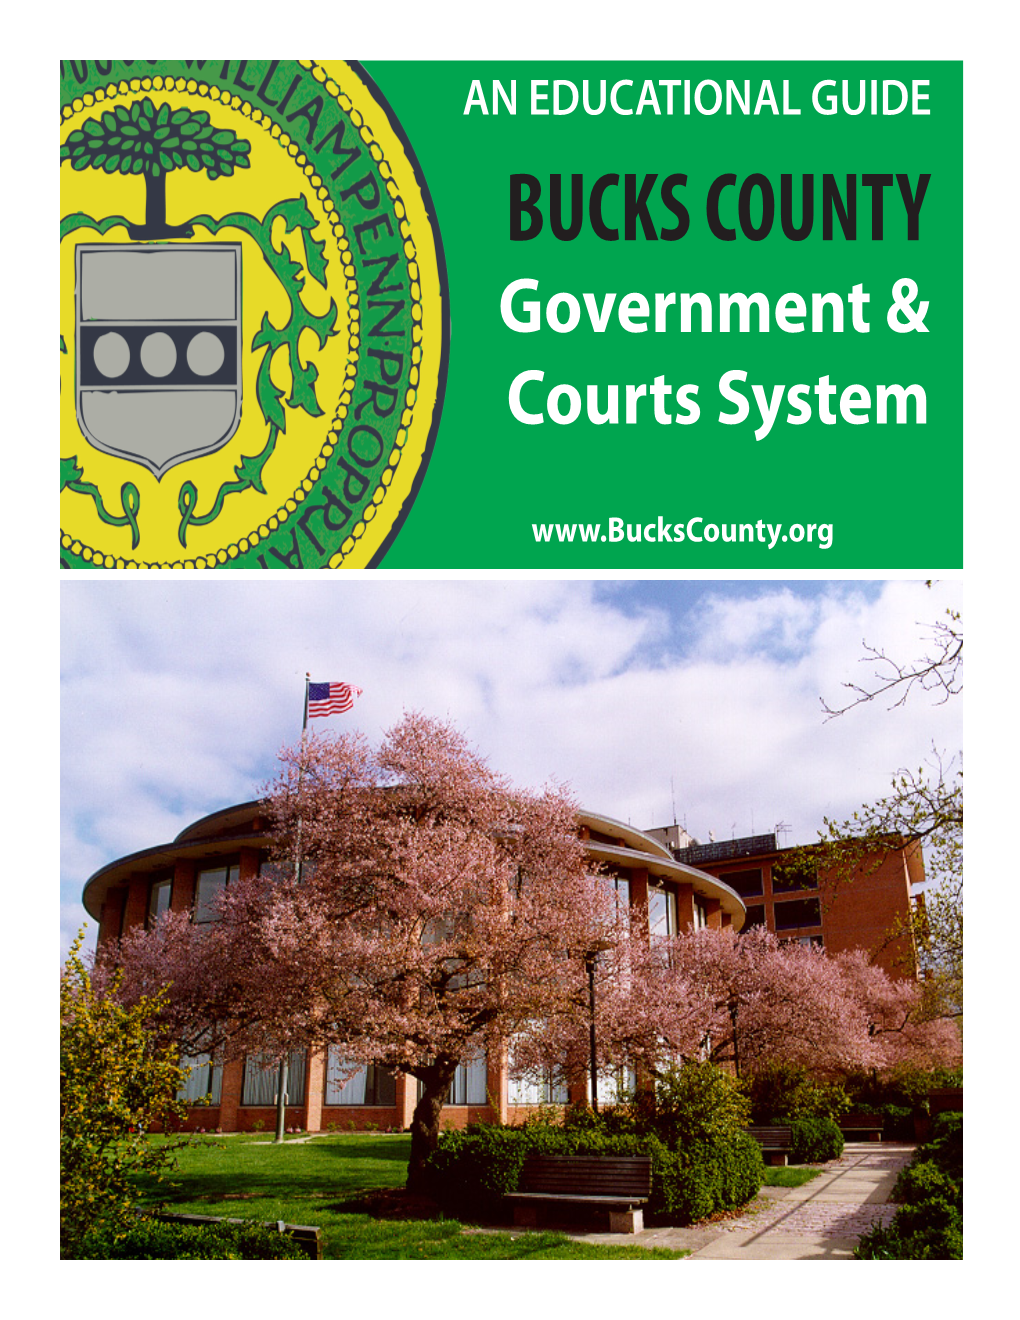 Bucks County Government and Courts System